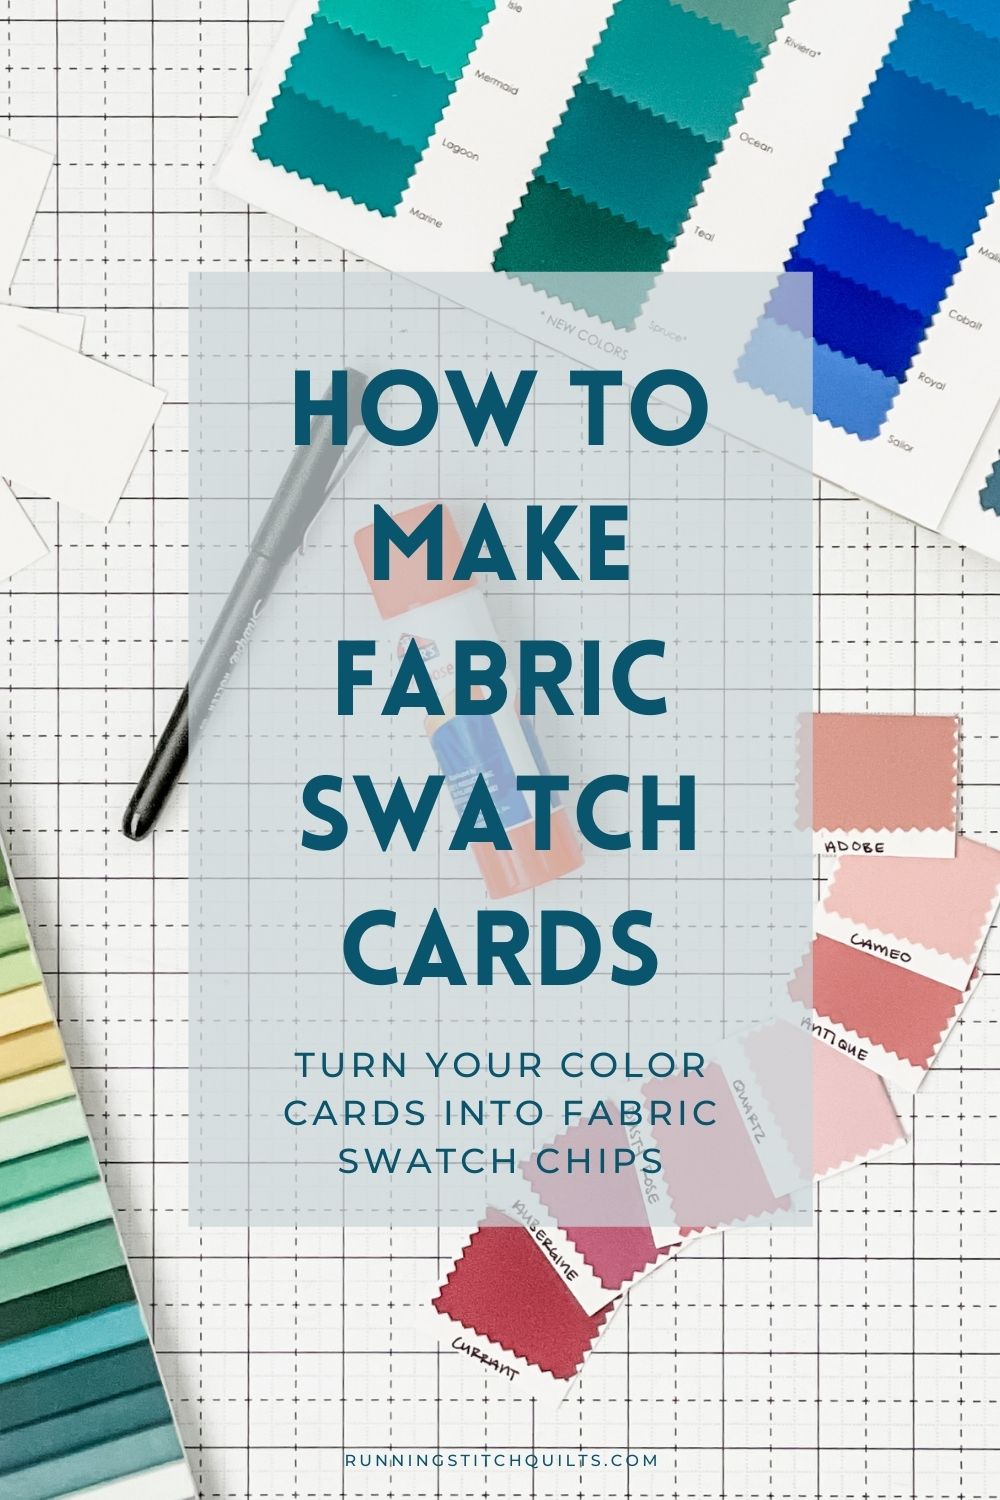 How to Make Fabric Swatch Cards - Running Stitch Quilts